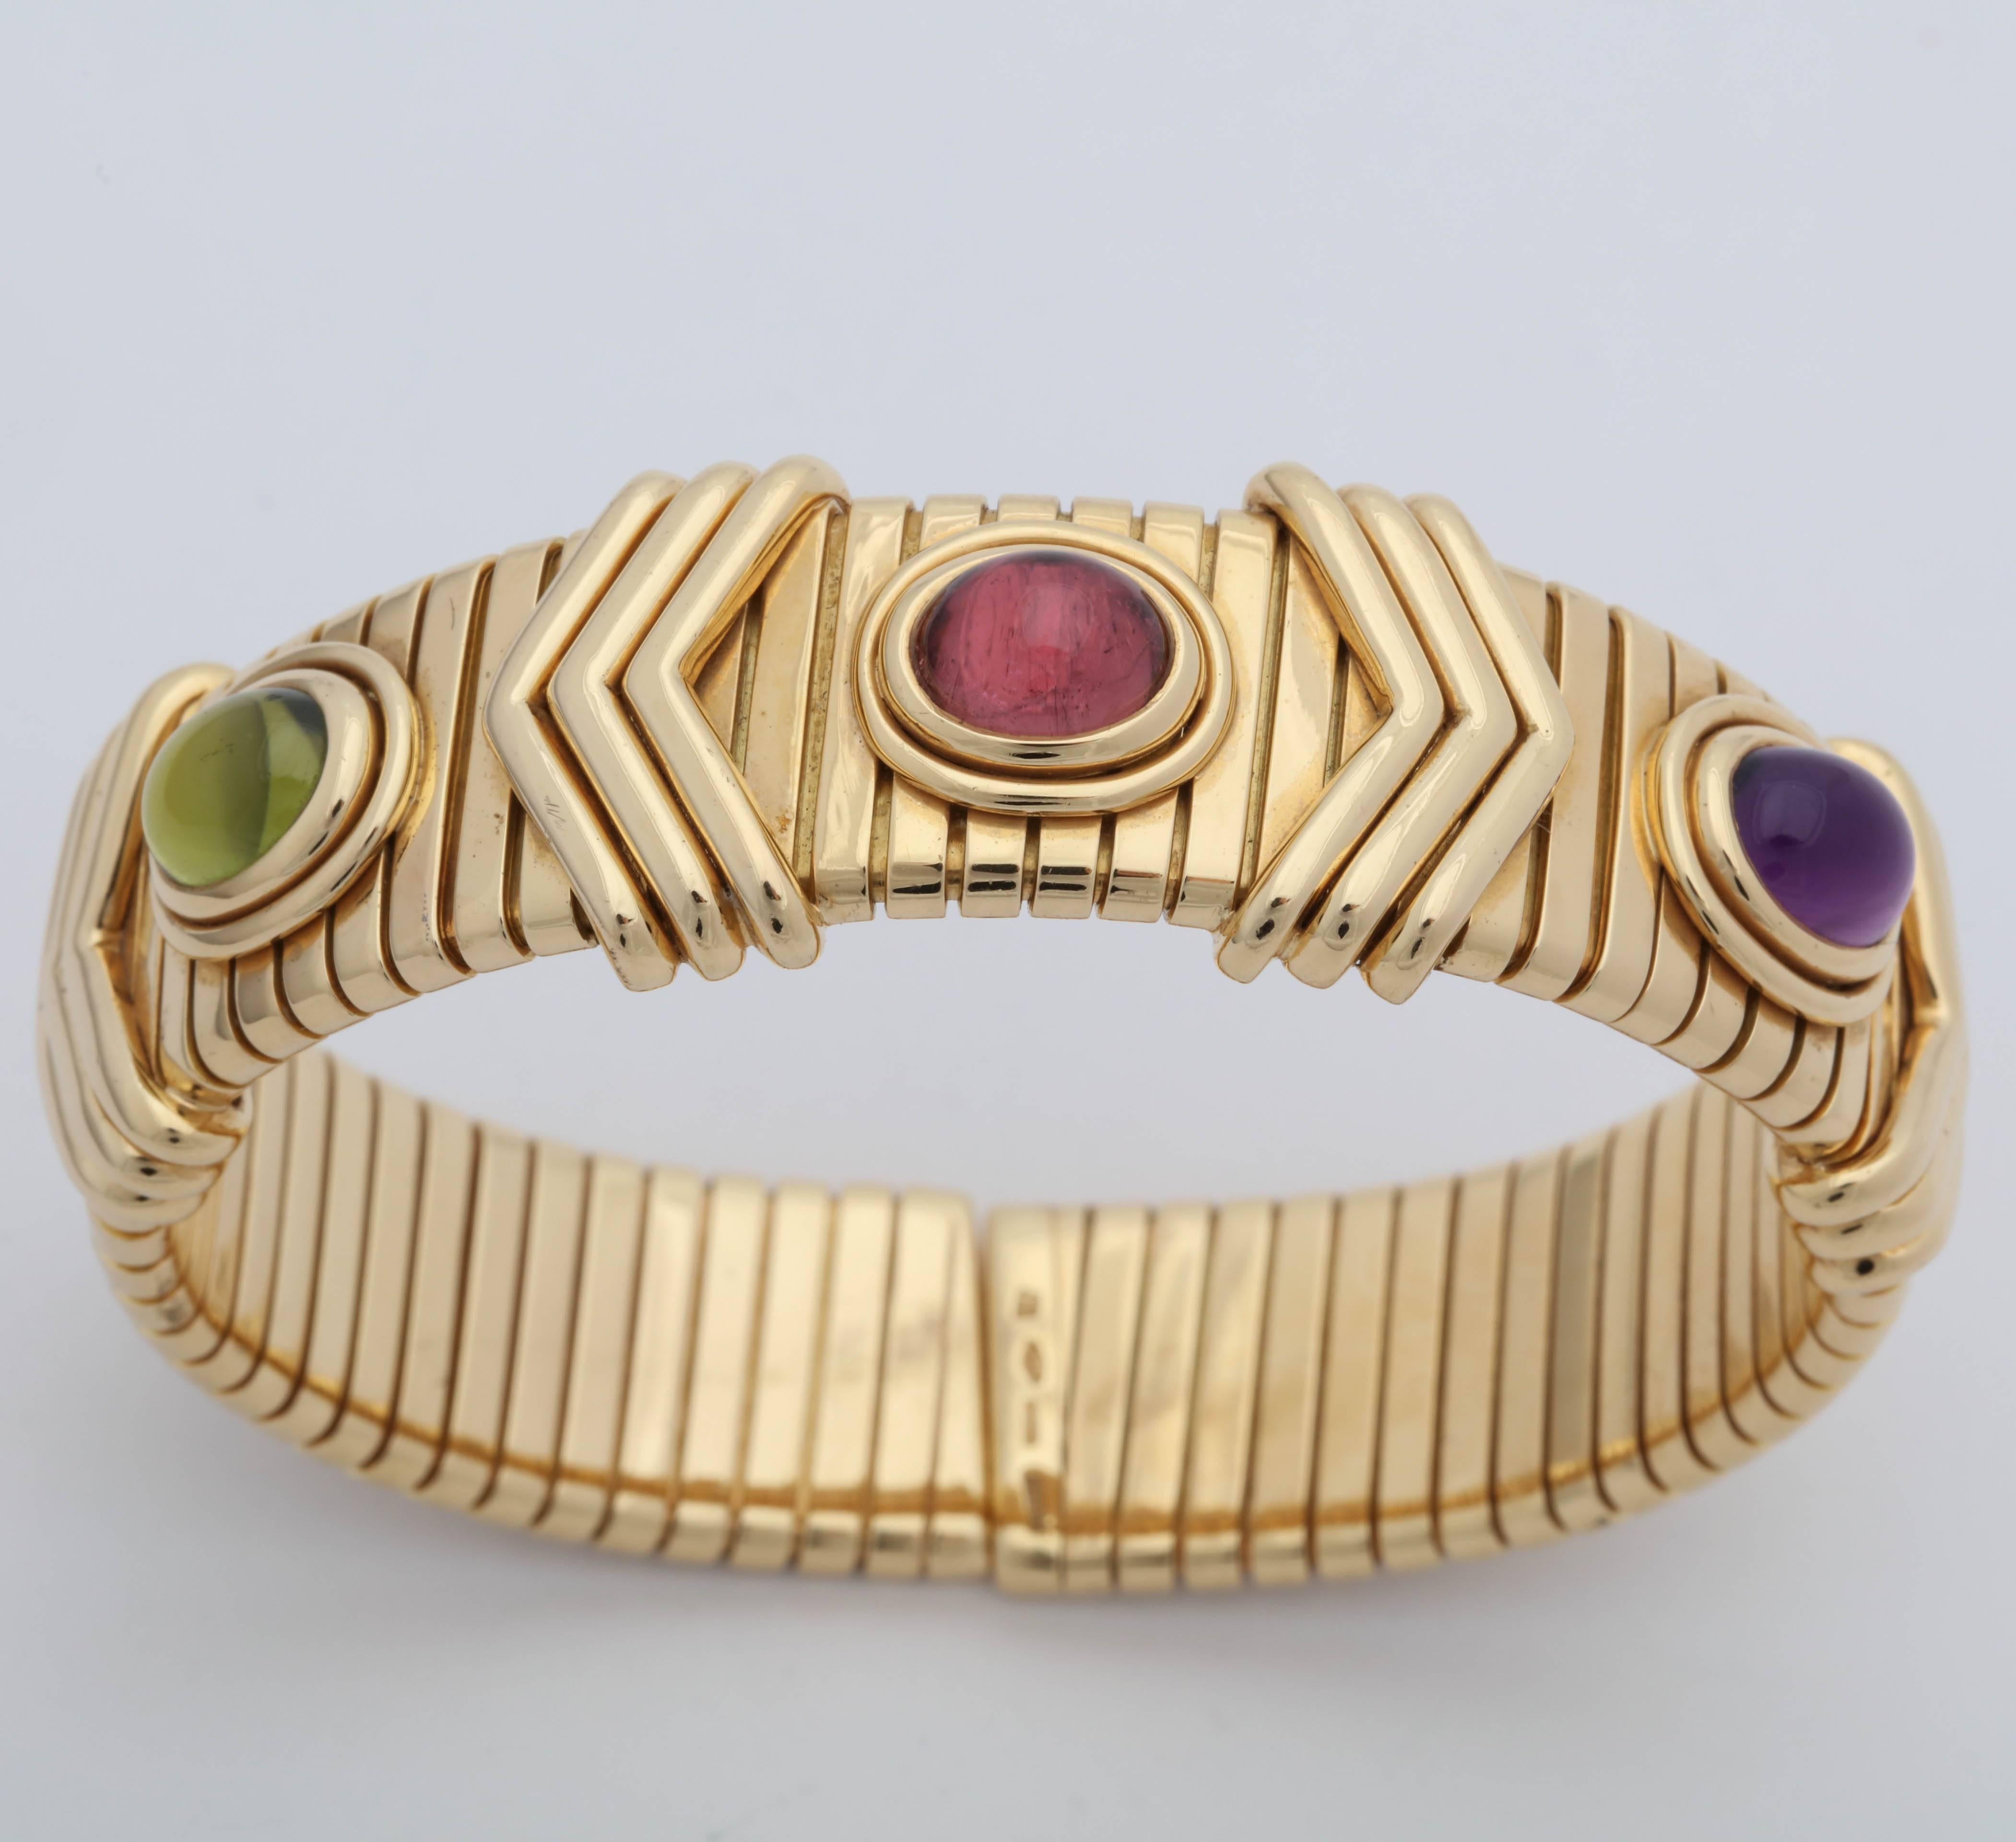 One Bulgari Flexible Cuff Bracelet, Omega Style Created In  18kt Yellow Gold. Bracelet Is Further Embellished with Three Cabochon semi-Precious Stones consisting of One 6MM Pink Tourmaline In The Center And One 6MM Cabochon Peridot Stone And Lastly